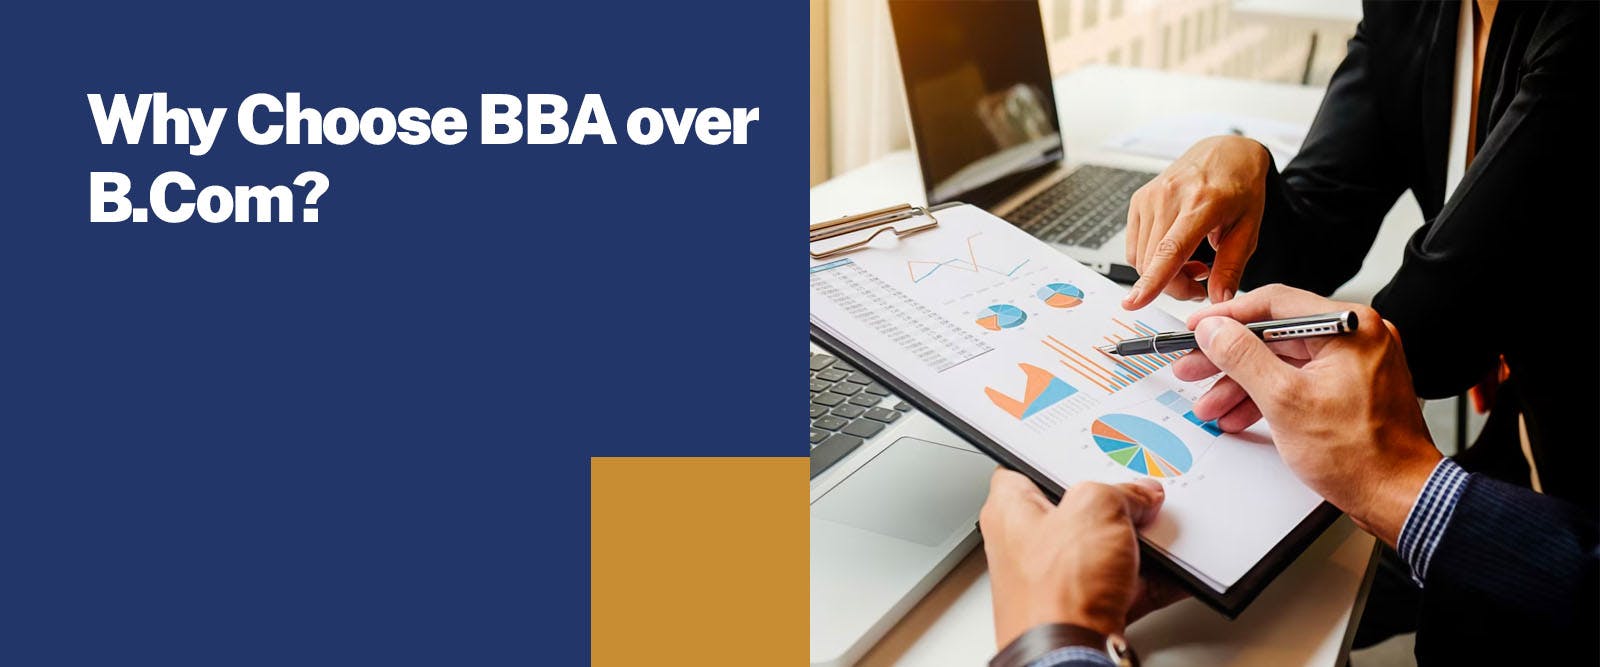 Why Choose BBA over B.Com?